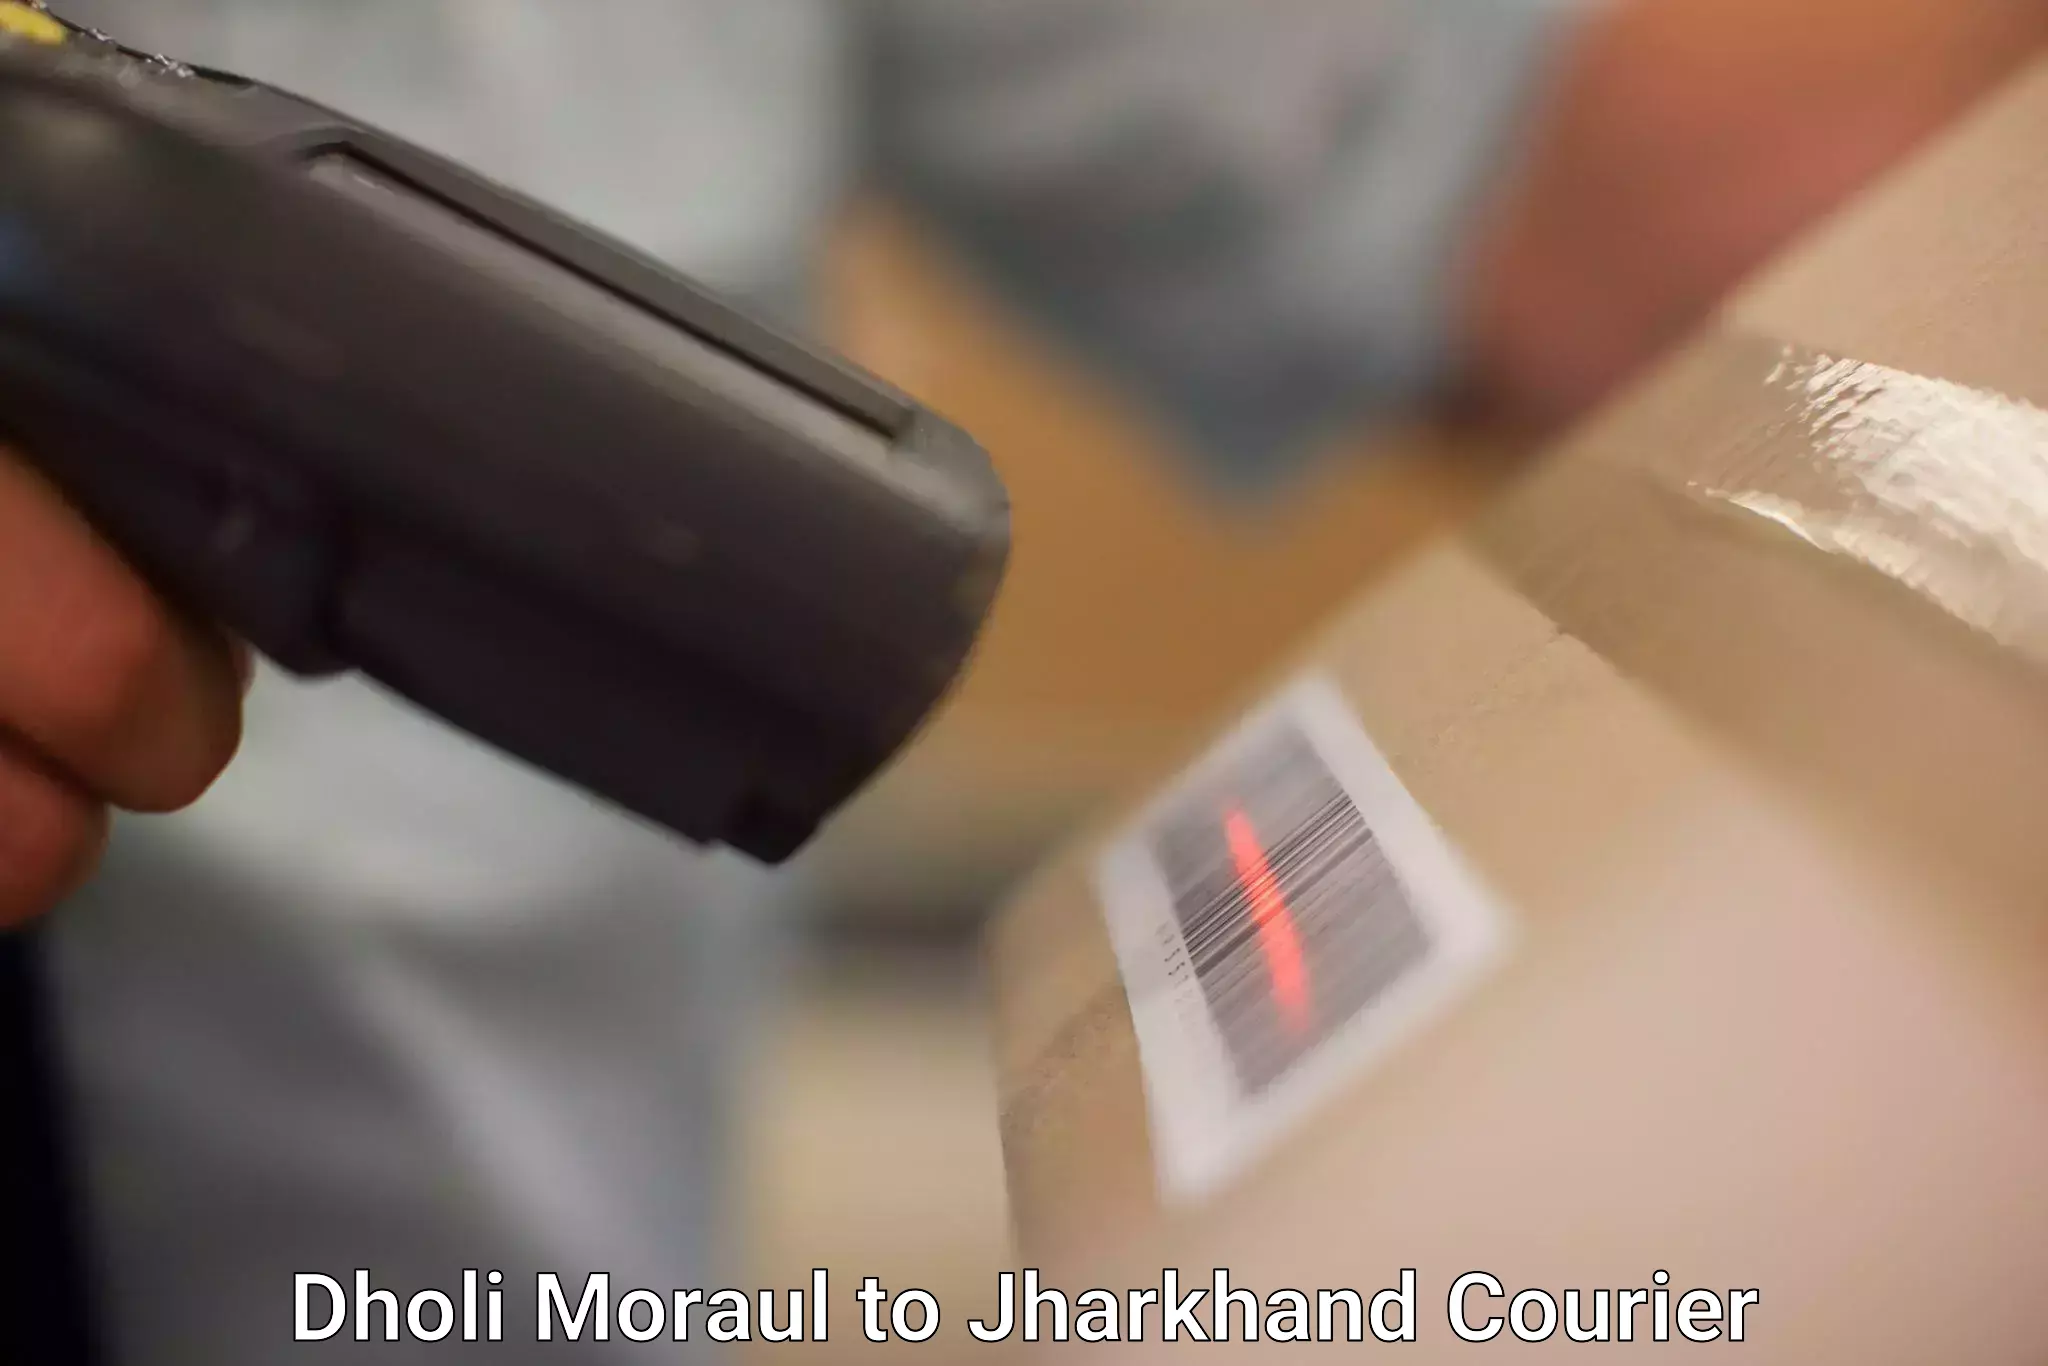 24-hour courier service Dholi Moraul to Dhanbad